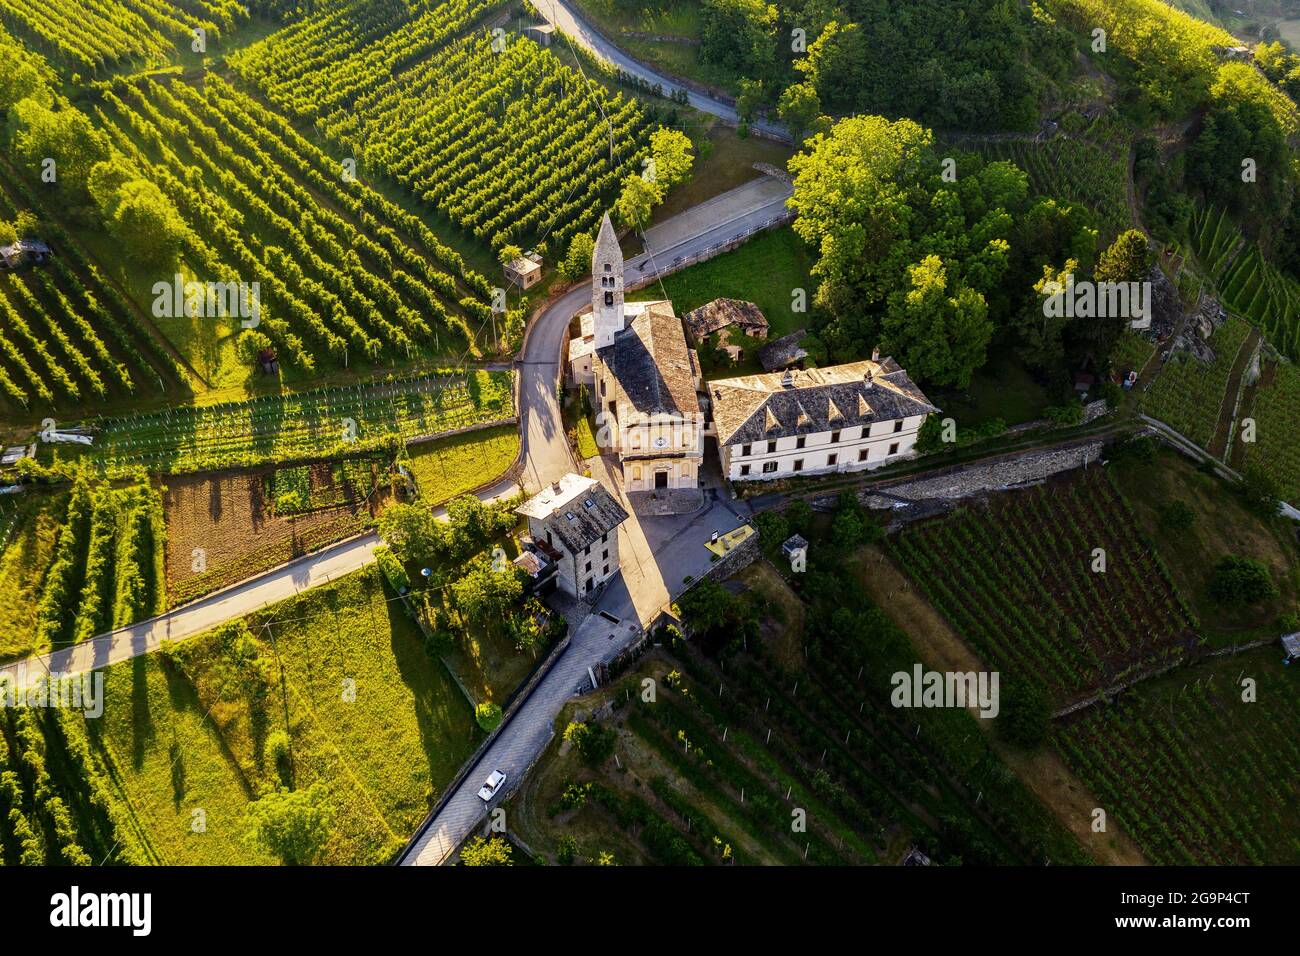 Valtellina (IT), Castionetto di Chiuro, Aerial view of the vineyards and little church Stock Photo